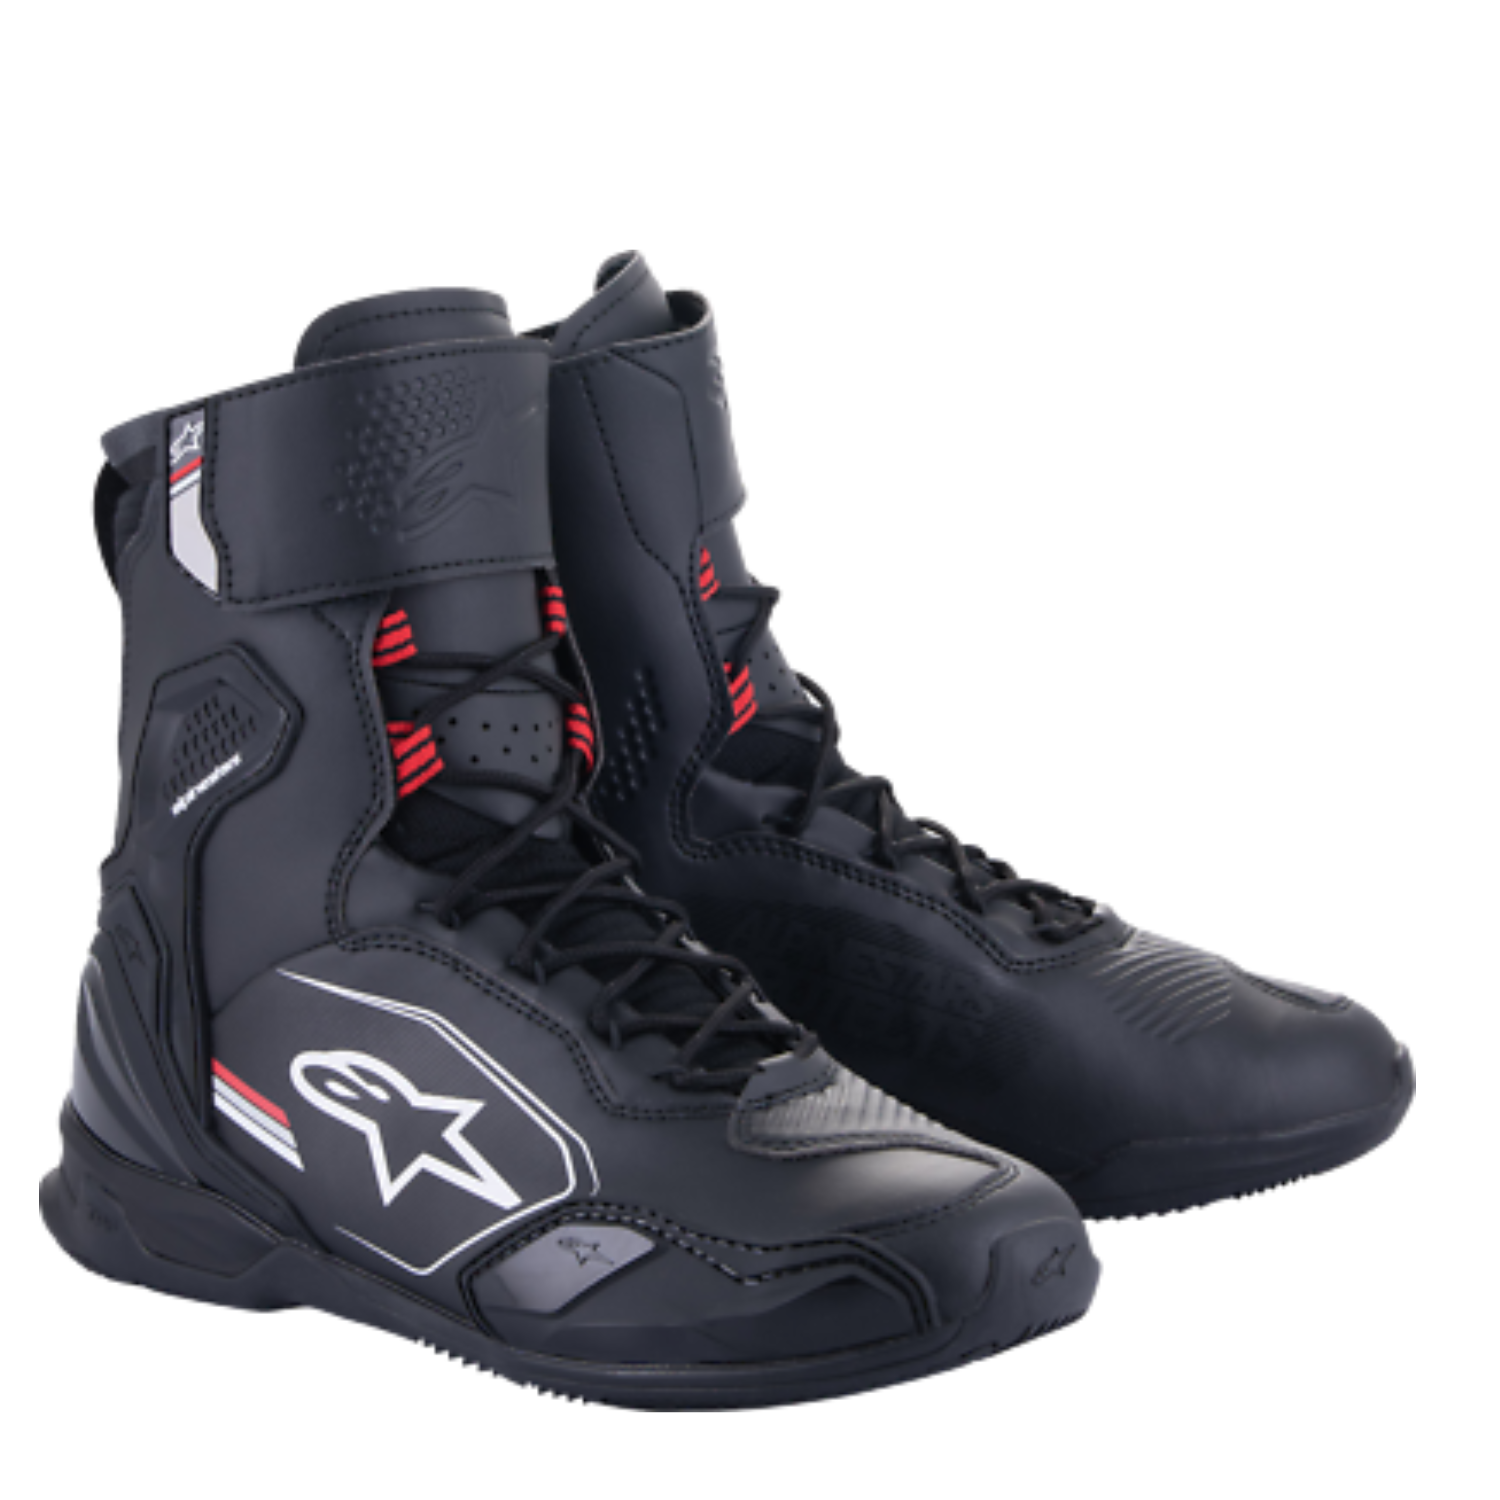 Image of EU Alpinestars Superfaster Shoes Black Gray Bright Red Taille US 95